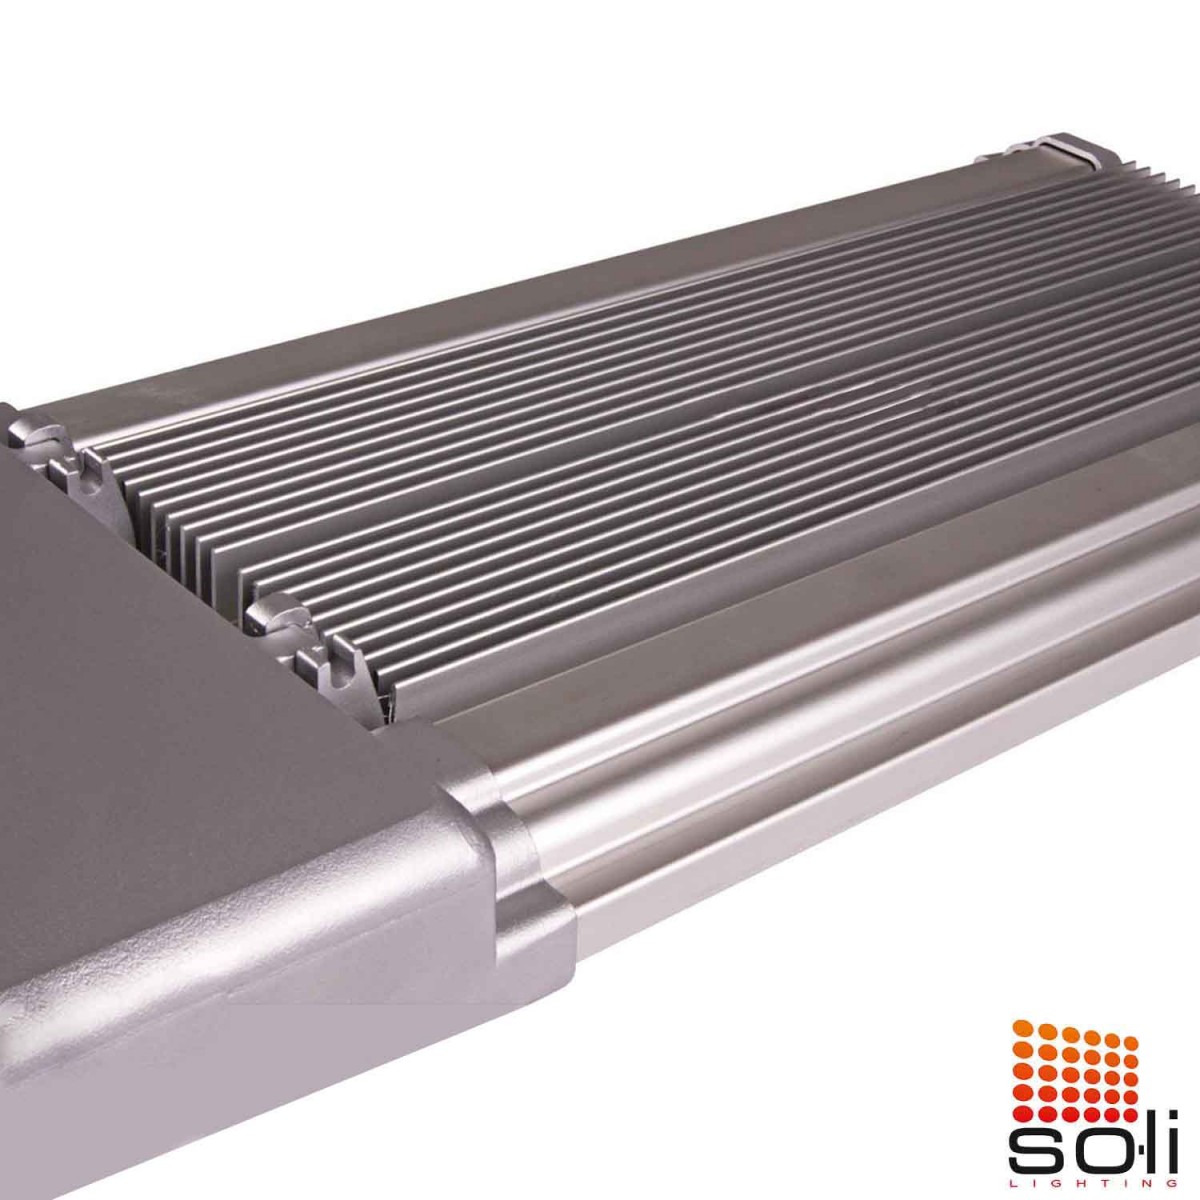 70W SK Series LED Road and Street Lighting Fixture - SK070